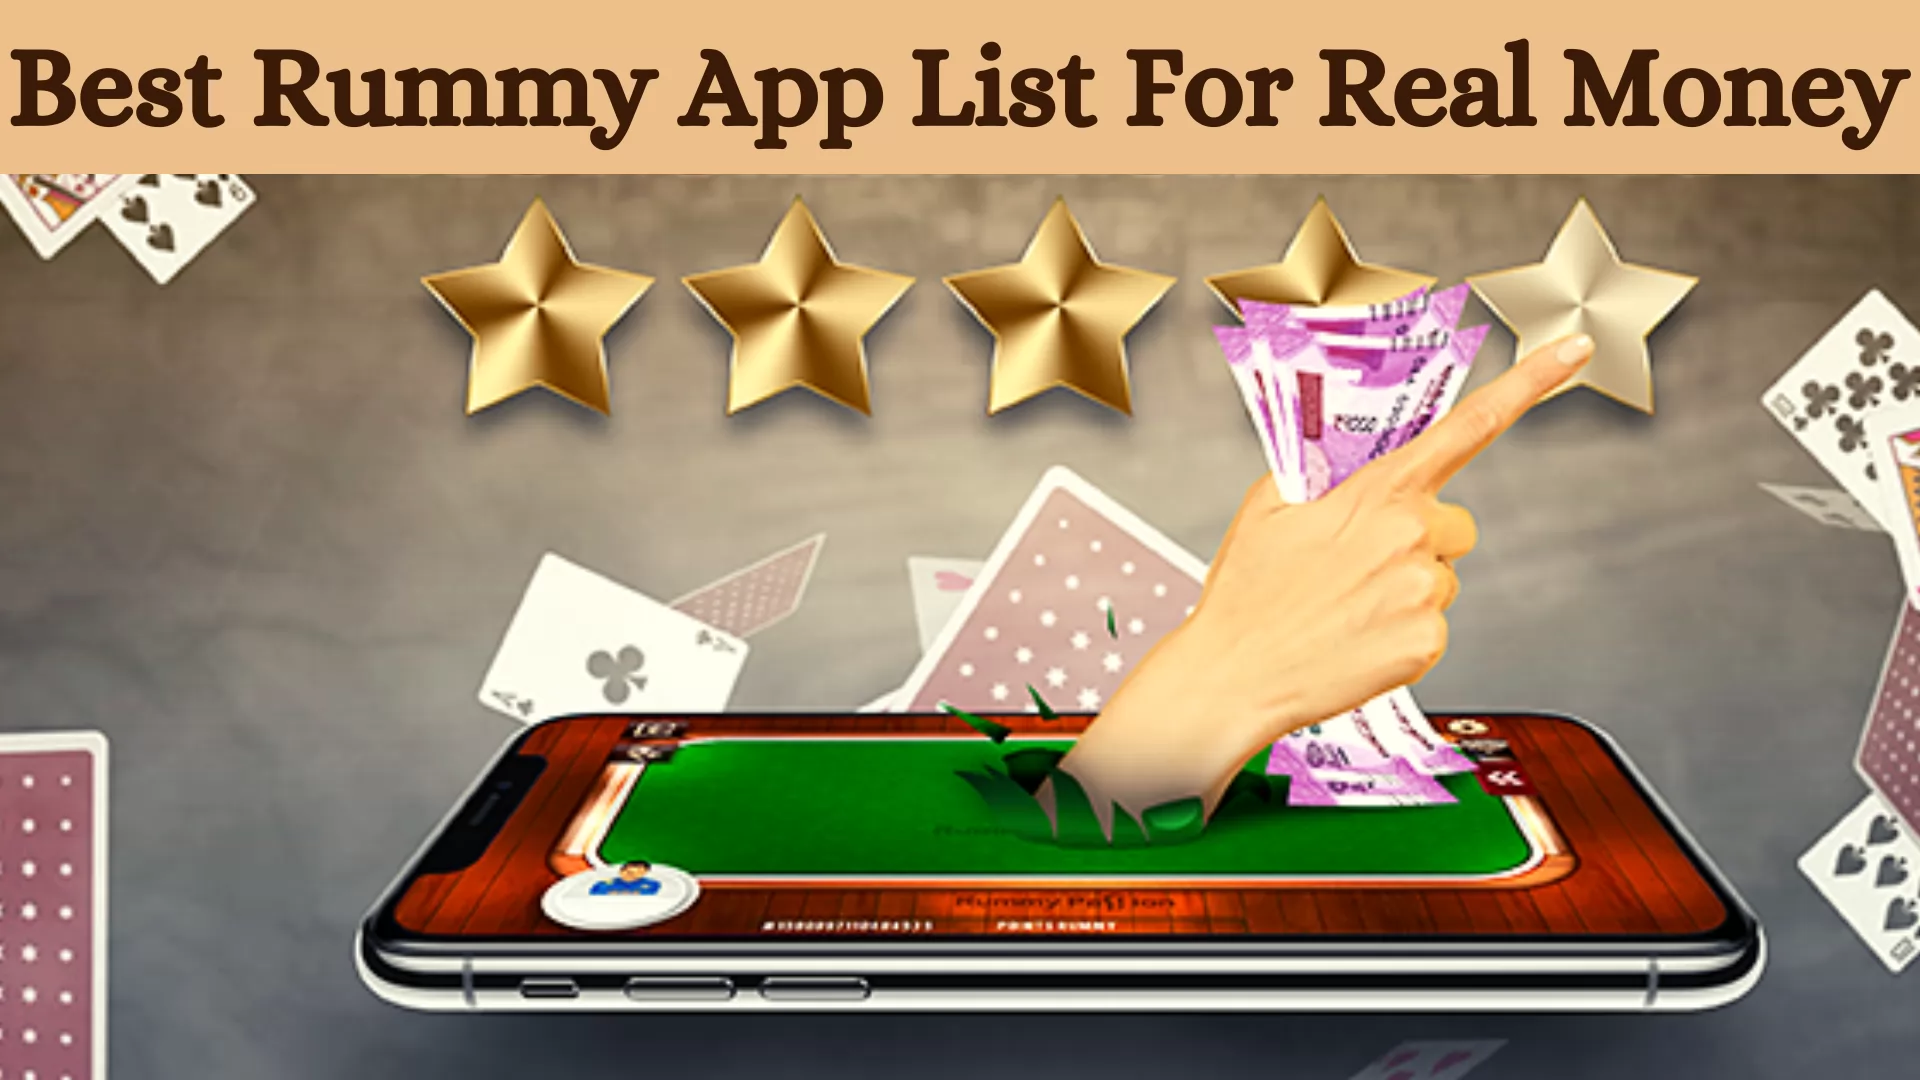 Best Rummy App List For Real Money